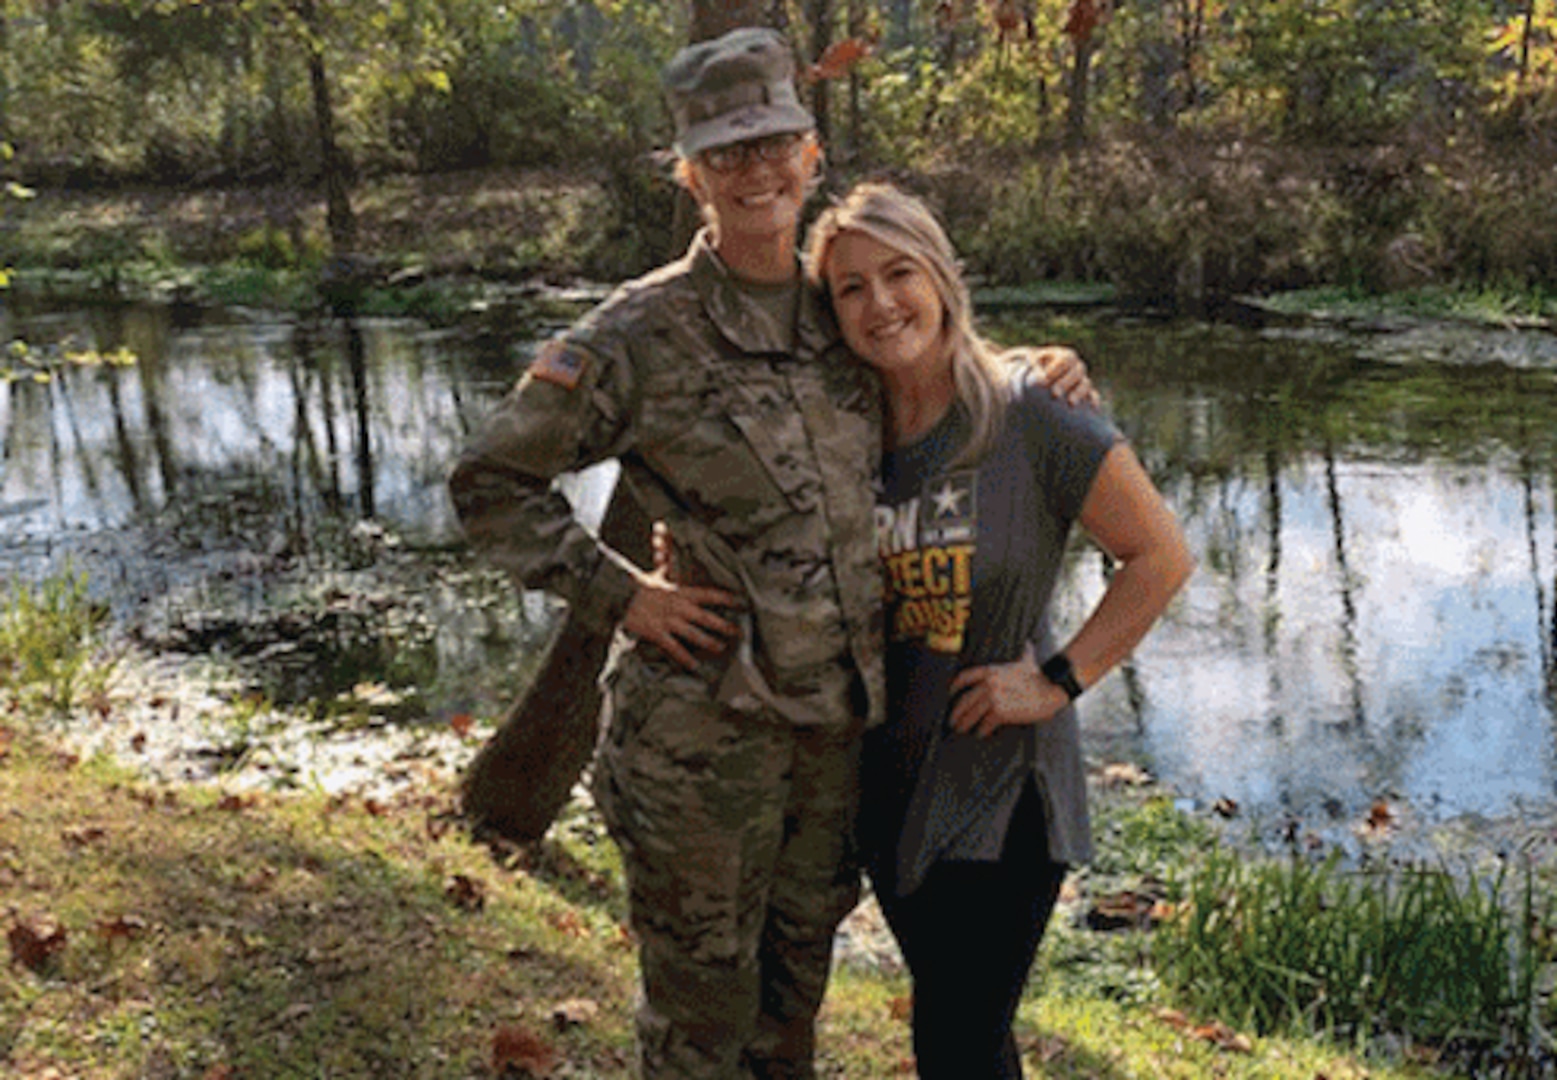 Lexi Ireton, left, and her sister, Hailey, together at Fort Leonard Wood, Missouri. The sisters enlisted together in the Ohio Army National Guard.